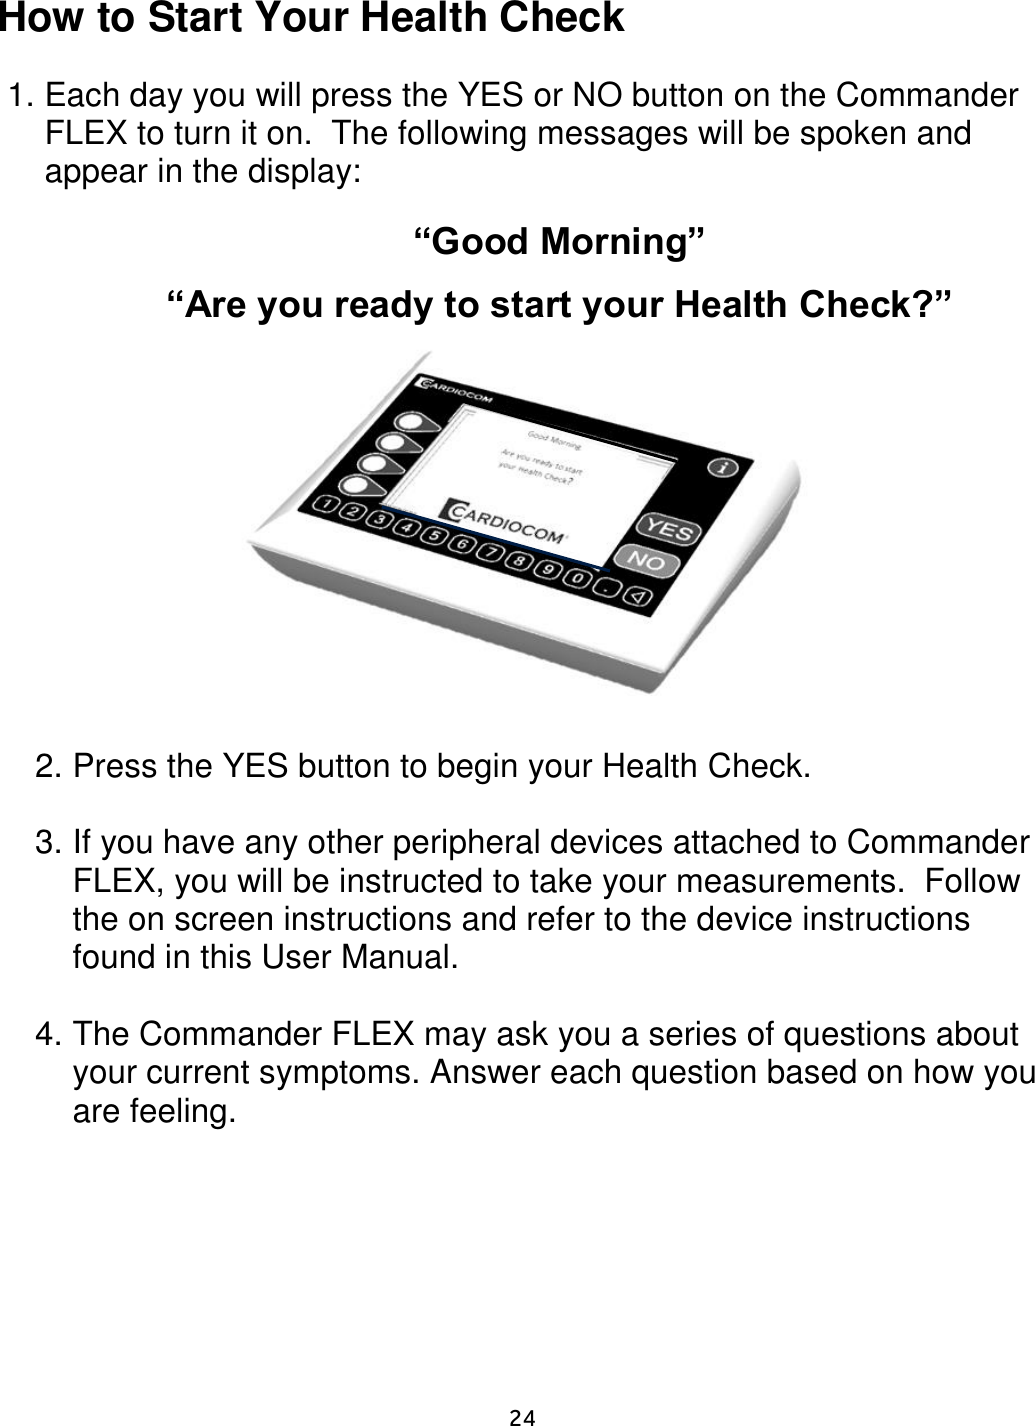     24  How to Start Your Health Check  1. Each day you will press the YES or NO button on the Commander FLEX to turn it on.  The following messages will be spoken and appear in the display:  “Good Morning”  “Are you ready to start your Health Check?”               2. Press the YES button to begin your Health Check.  3. If you have any other peripheral devices attached to Commander FLEX, you will be instructed to take your measurements.  Follow the on screen instructions and refer to the device instructions found in this User Manual.   4. The Commander FLEX may ask you a series of questions about your current symptoms. Answer each question based on how you are feeling.   